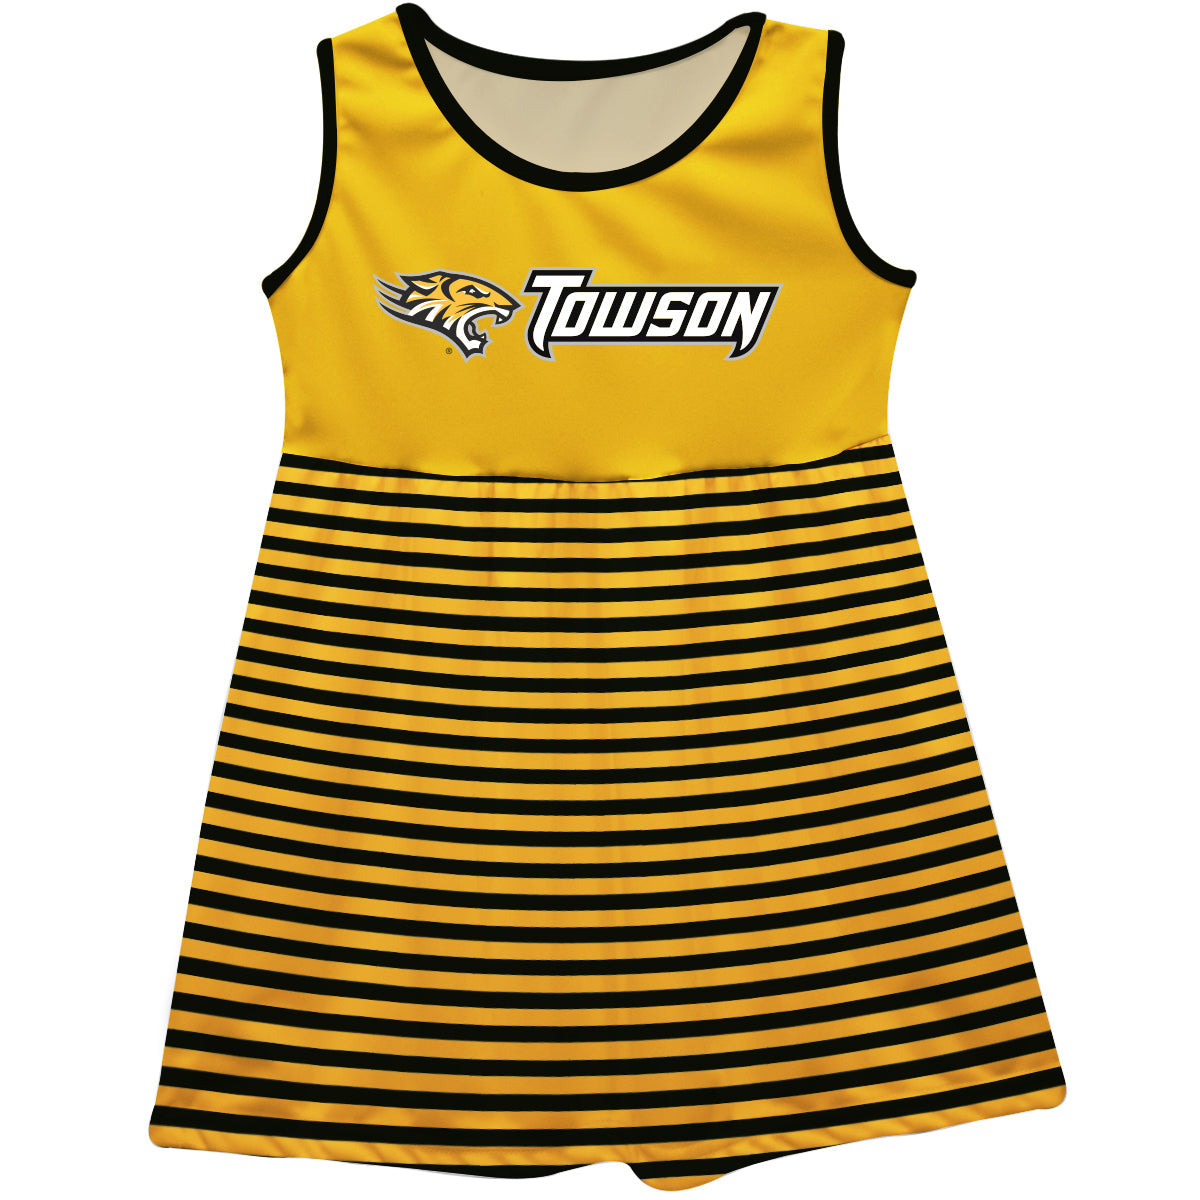 Towson University Tigers Girls Game Day Sleeveless Tank Dress Solid Gold Logo Stripes on Skirt by Vive La Fete-Campus-Wardrobe